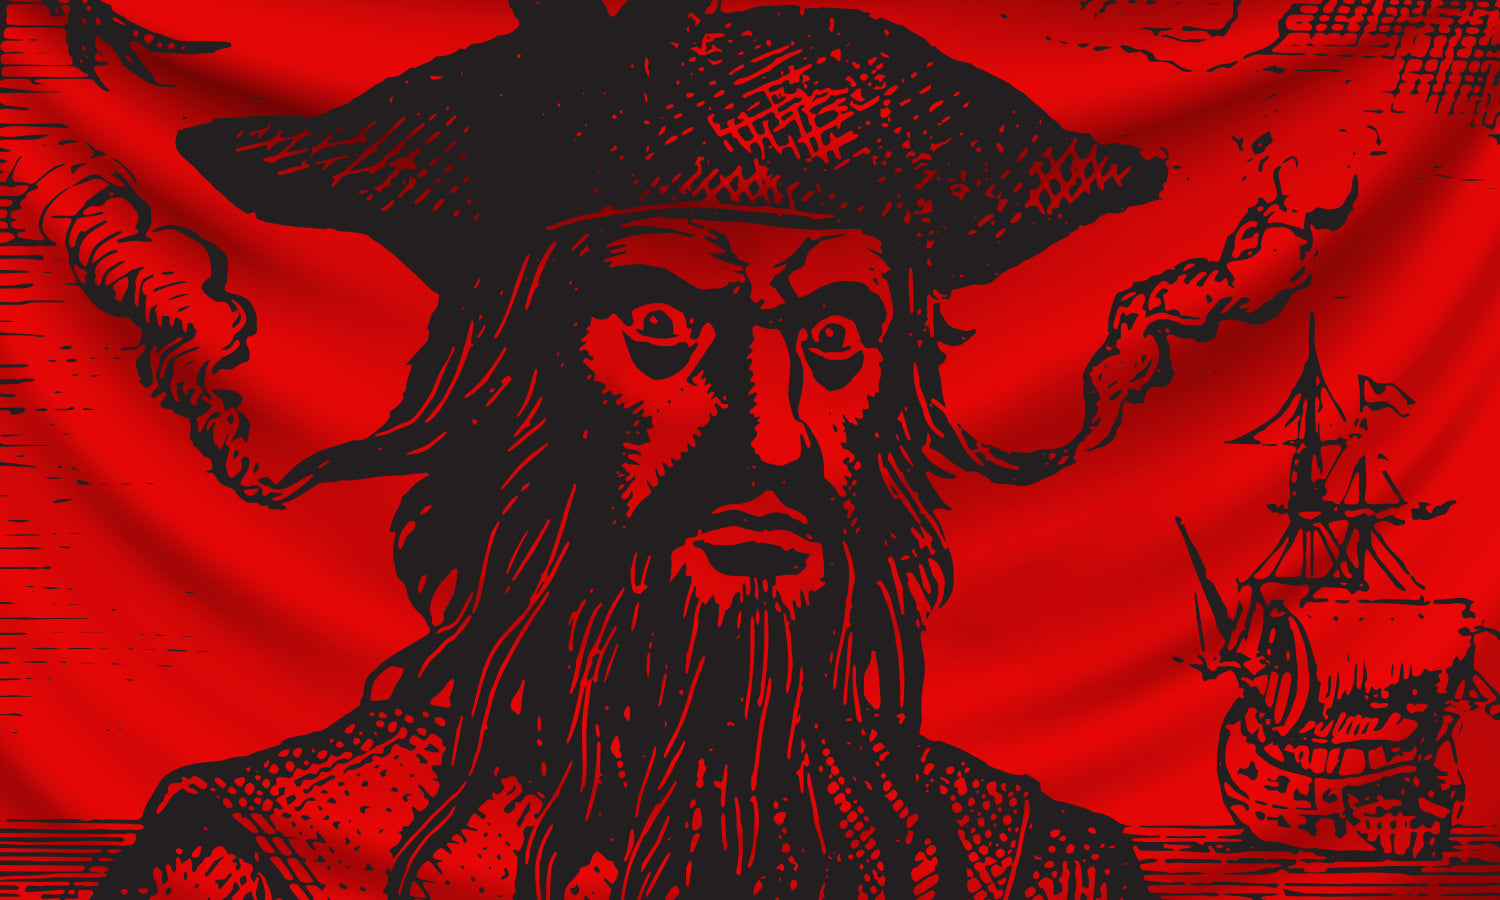 Blackbeard's Flag Tattoo: The History and Meaning Behind the Infamous Pirate's Symbol - wide 3